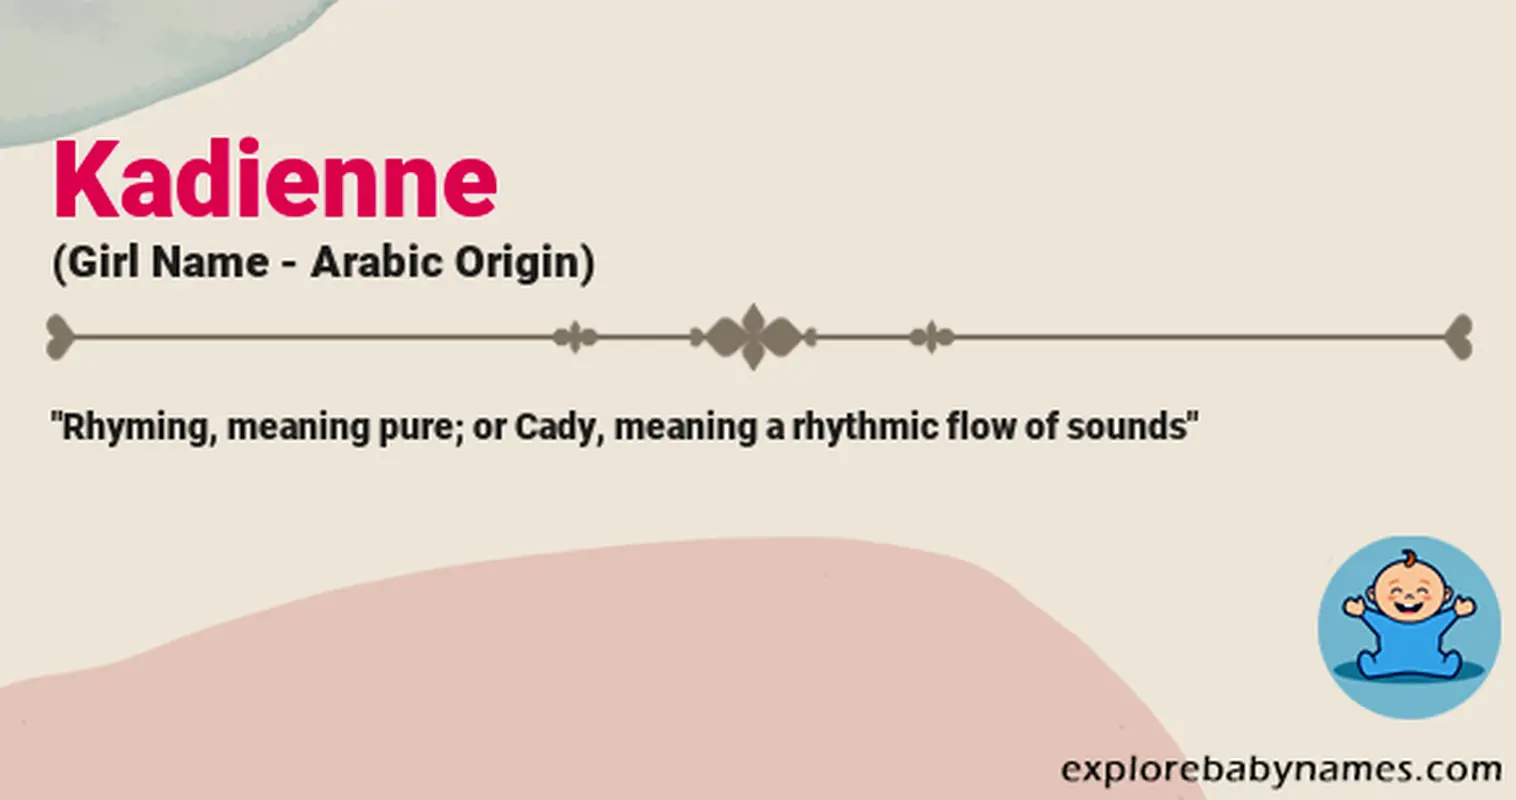 Meaning of Kadienne